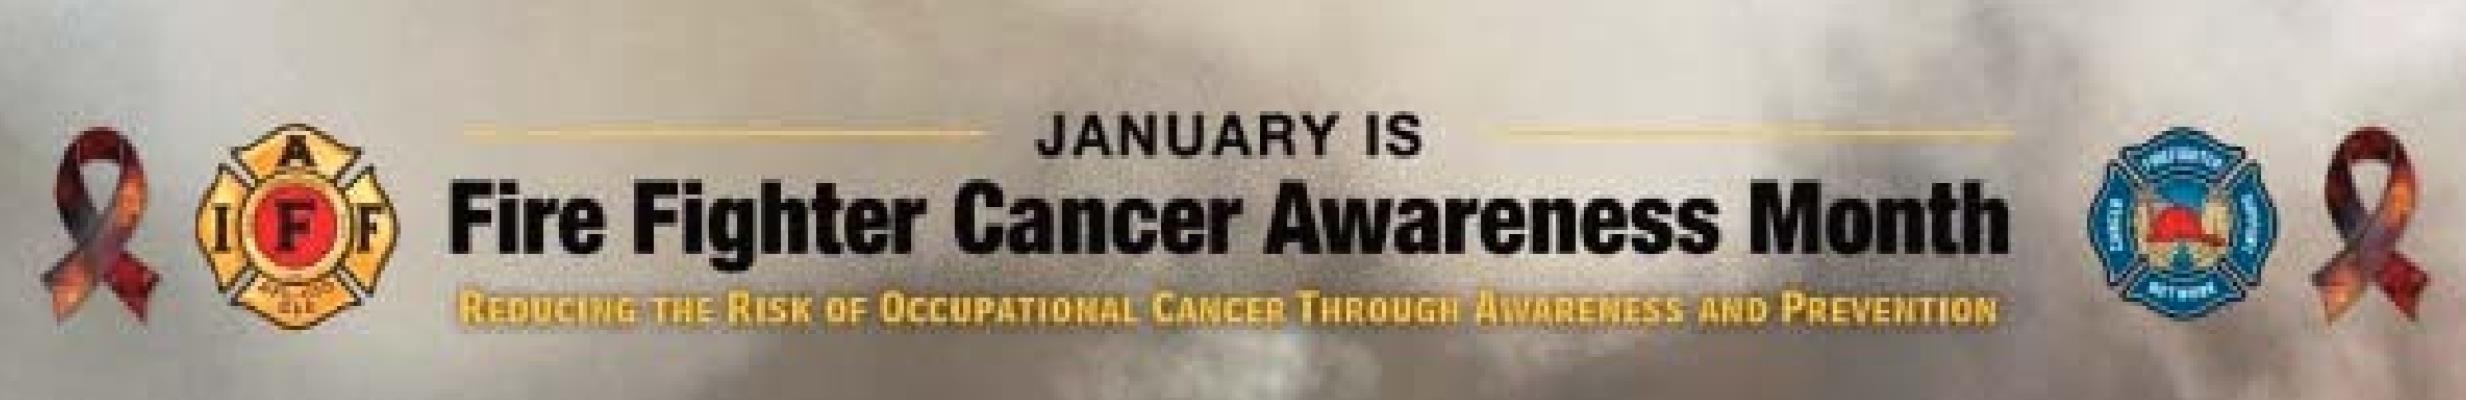 January Dedicated as Fire Fighter Cancer Awareness Month